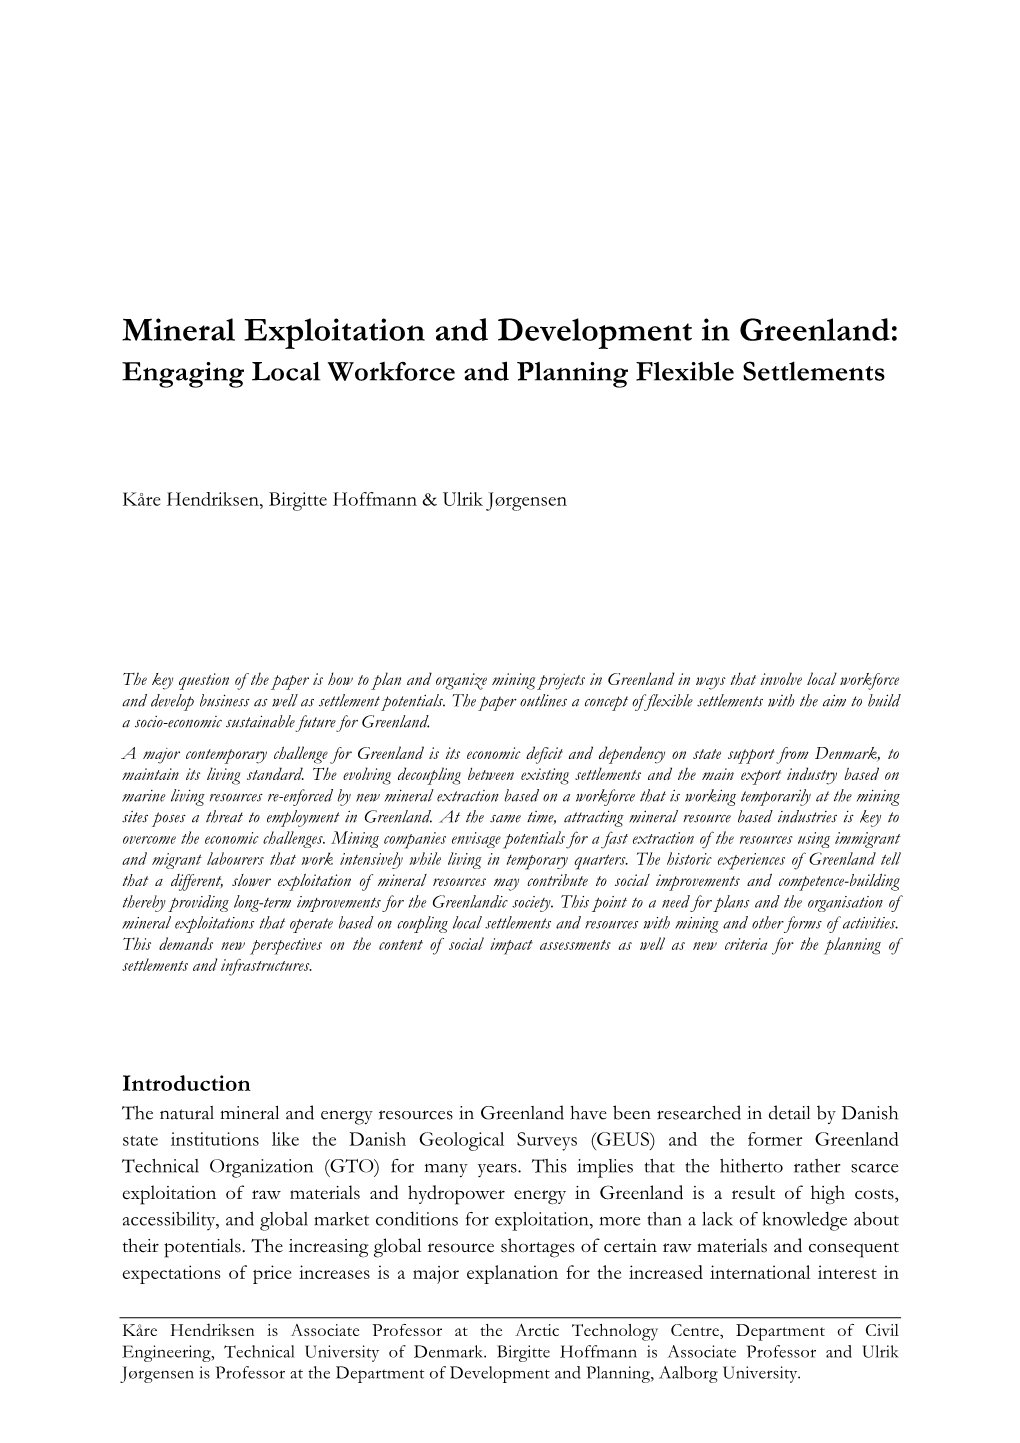 Mineral Exploitation and Development in Greenland: Engaging Local Workforce and Planning Flexible Settlements